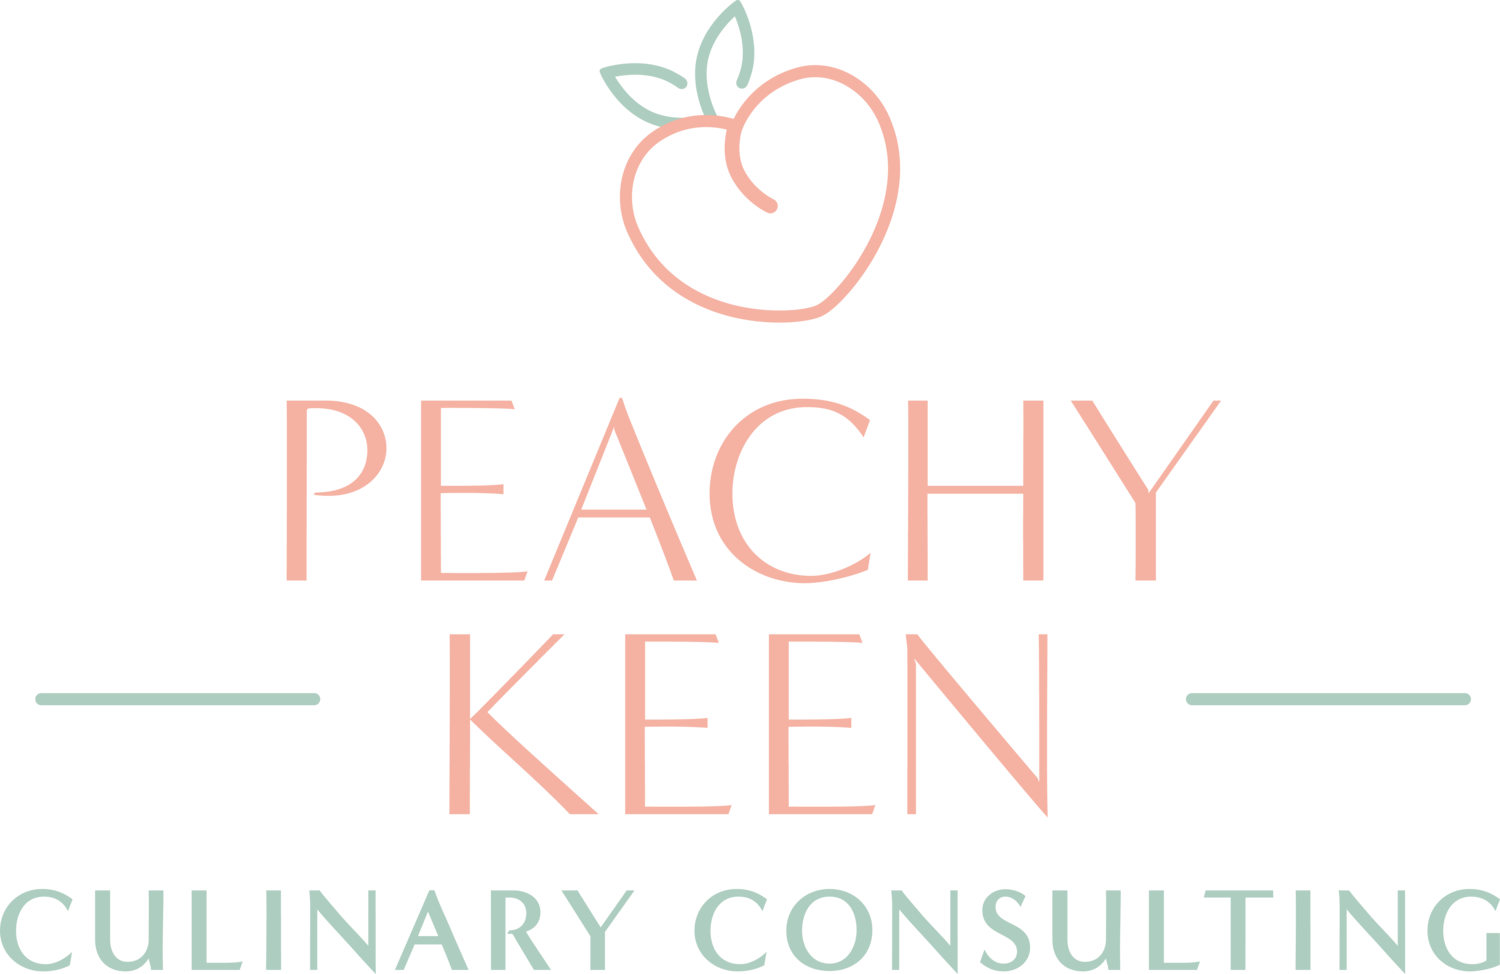 Peachy Keen Culinary Consulting